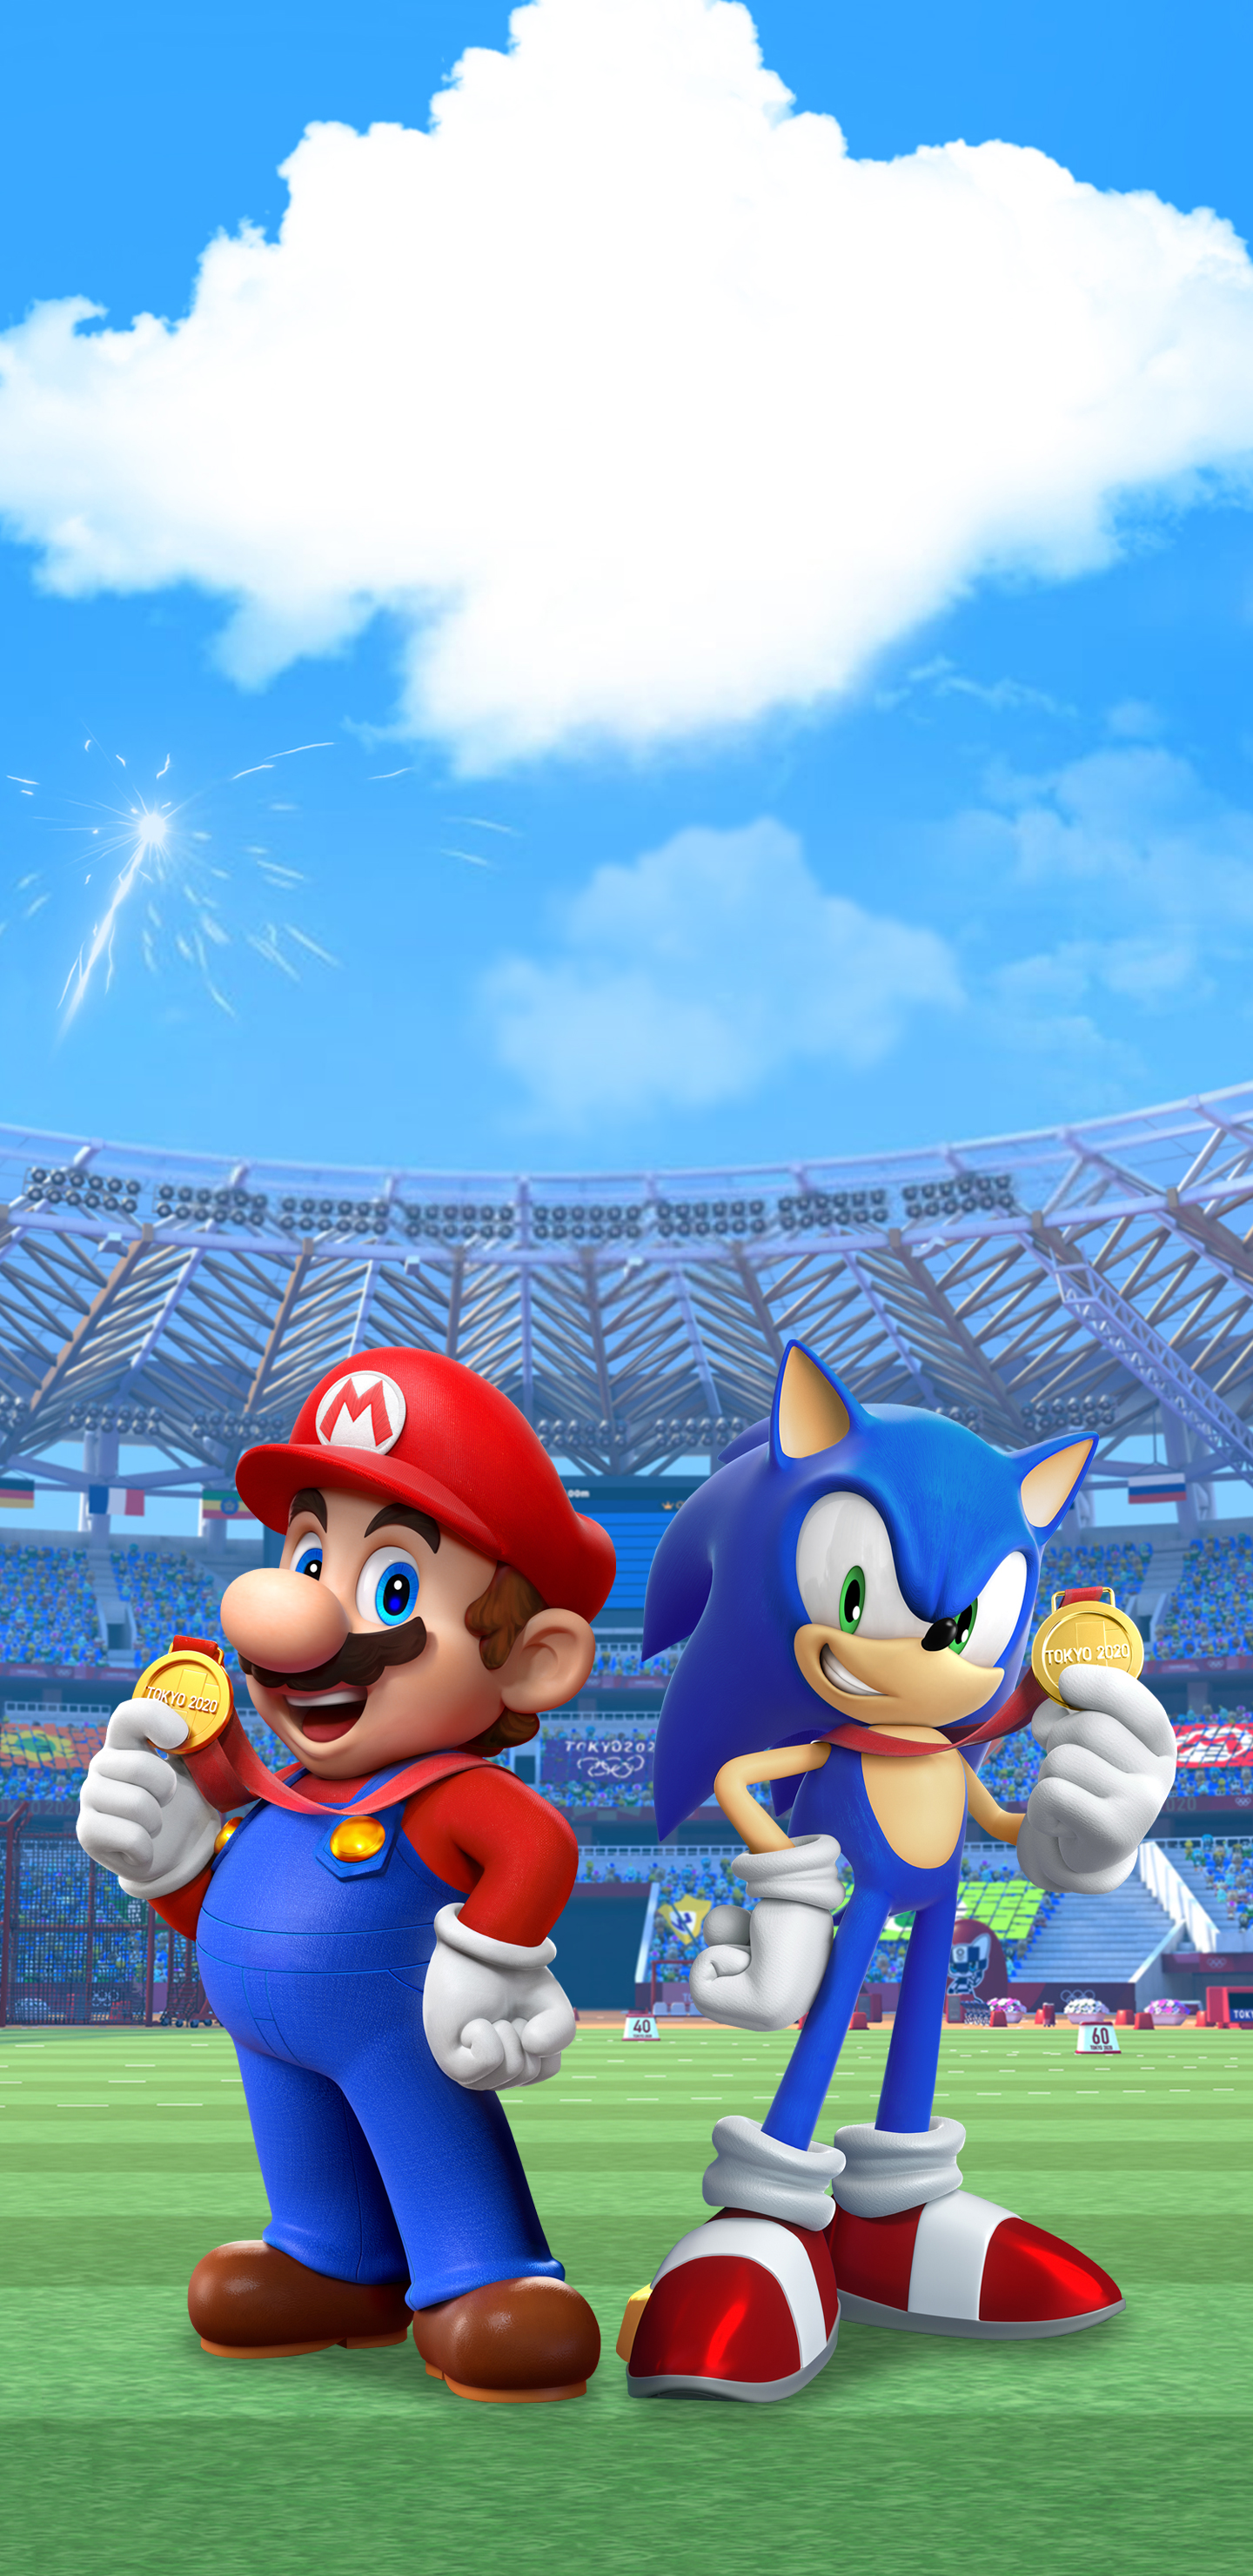 Mario And Sonic At The Olympic Games 1440x2960 Wallpaper Teahub Io